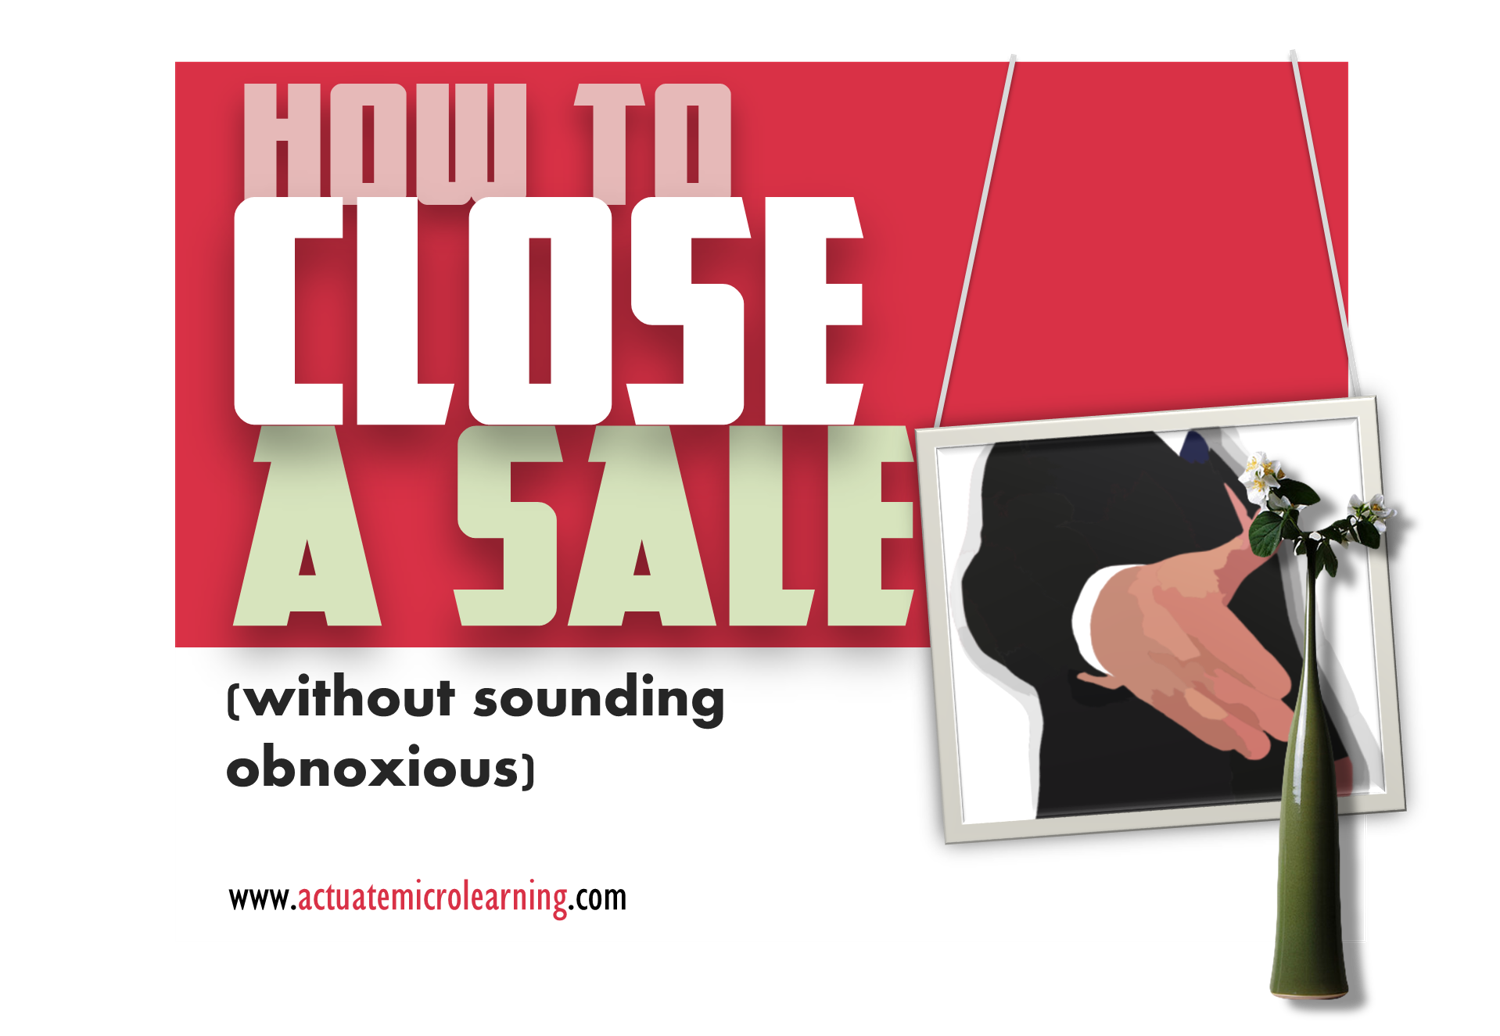 How to Close a Sale